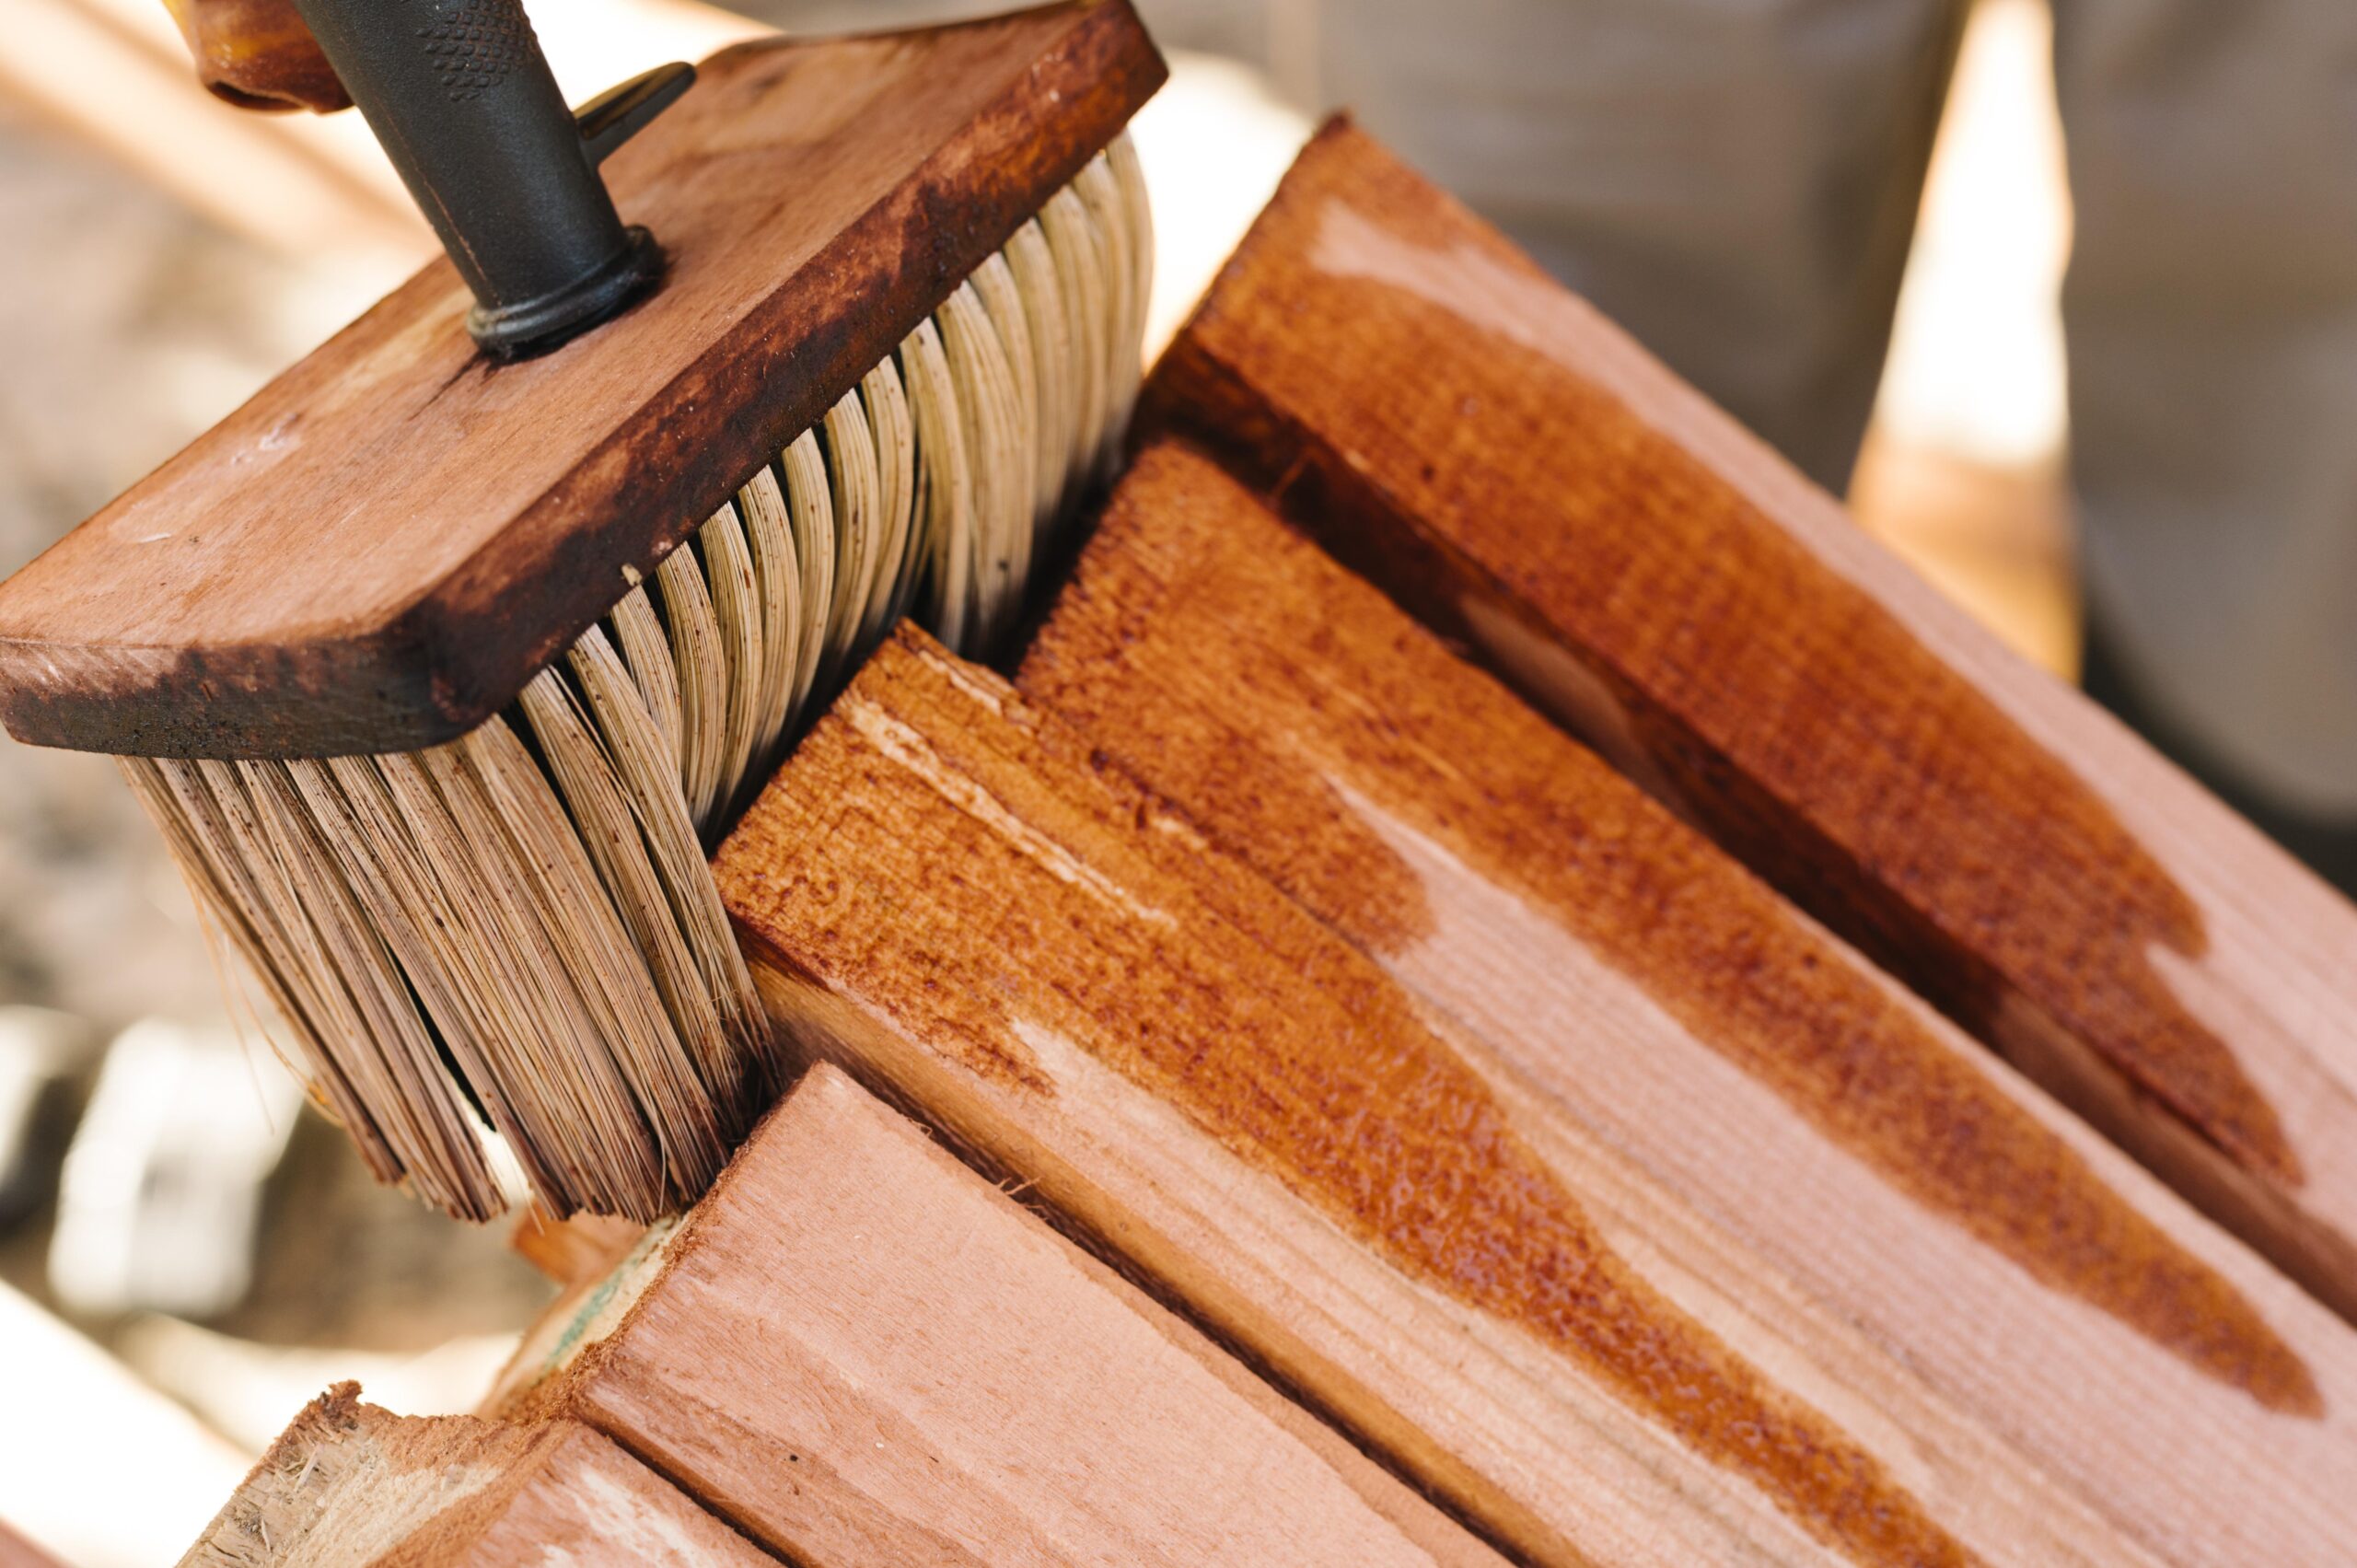 What is the perfect way to paint wooden furniture?